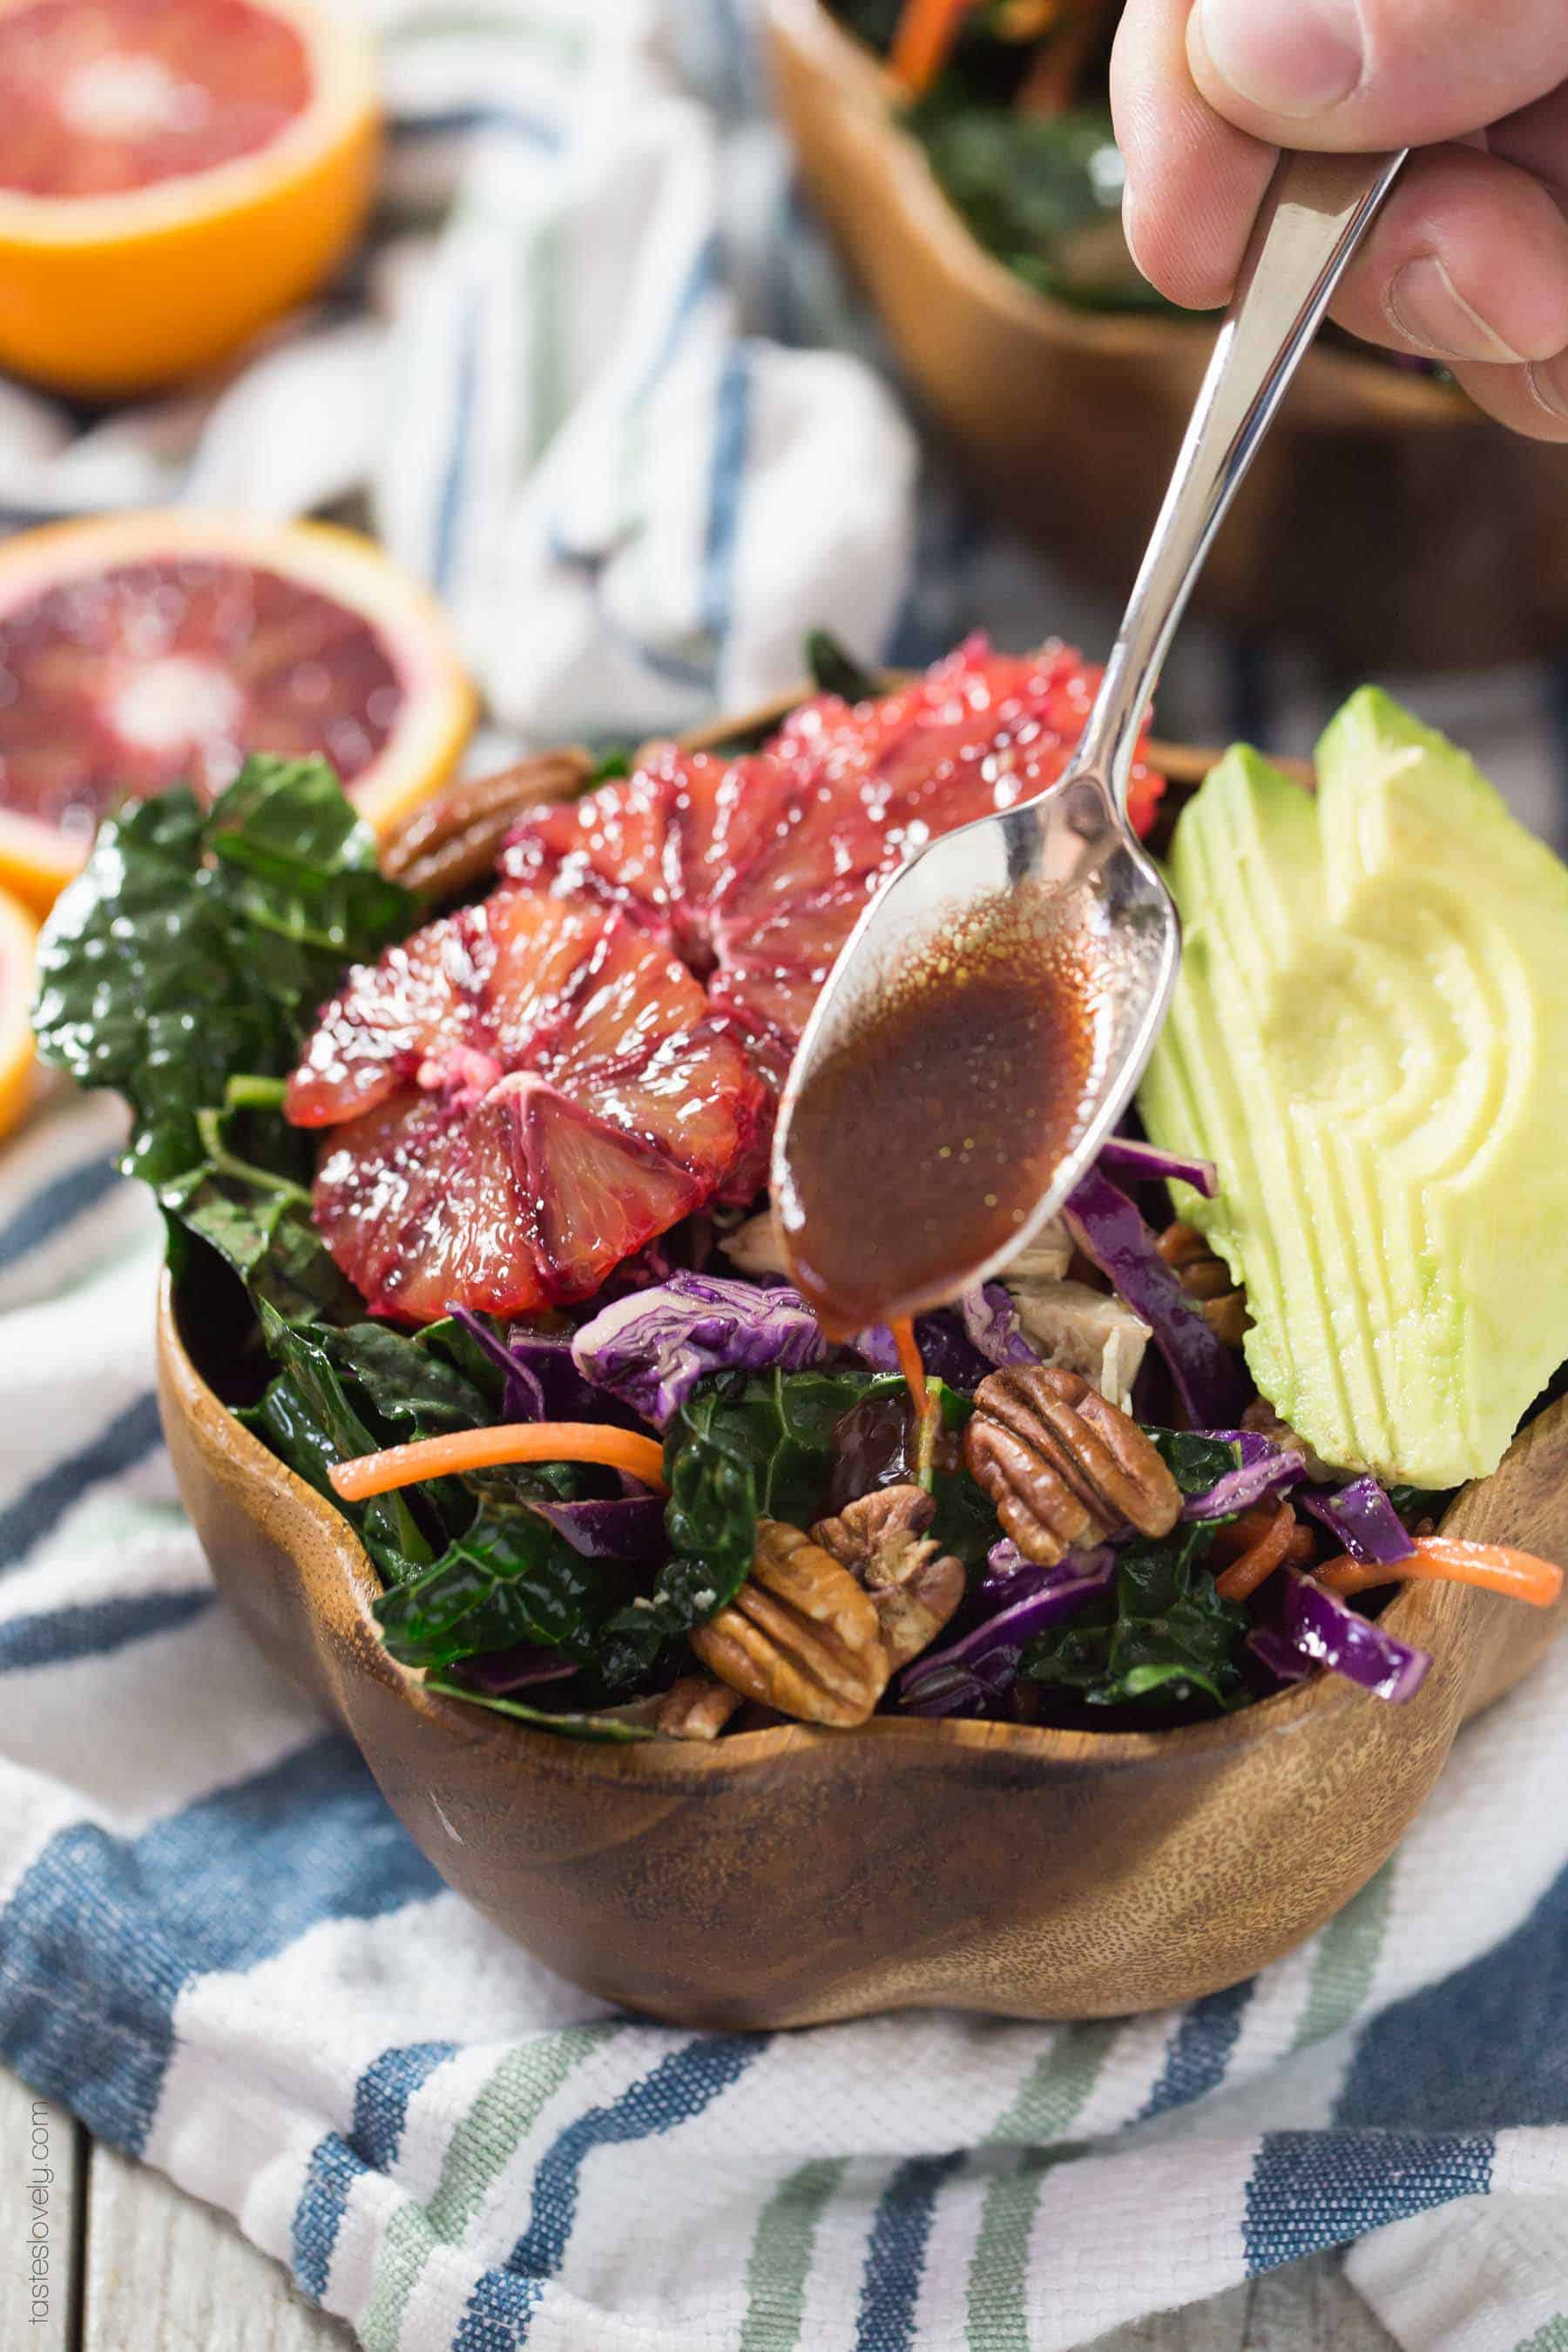 Winter Kale and Blood Orange Salad with a blood orange balsamic vinaigrette - a quick and healthy salad for lunch or dinner! (paleo, whole30, gluten free, dairy free, refined sugar free)